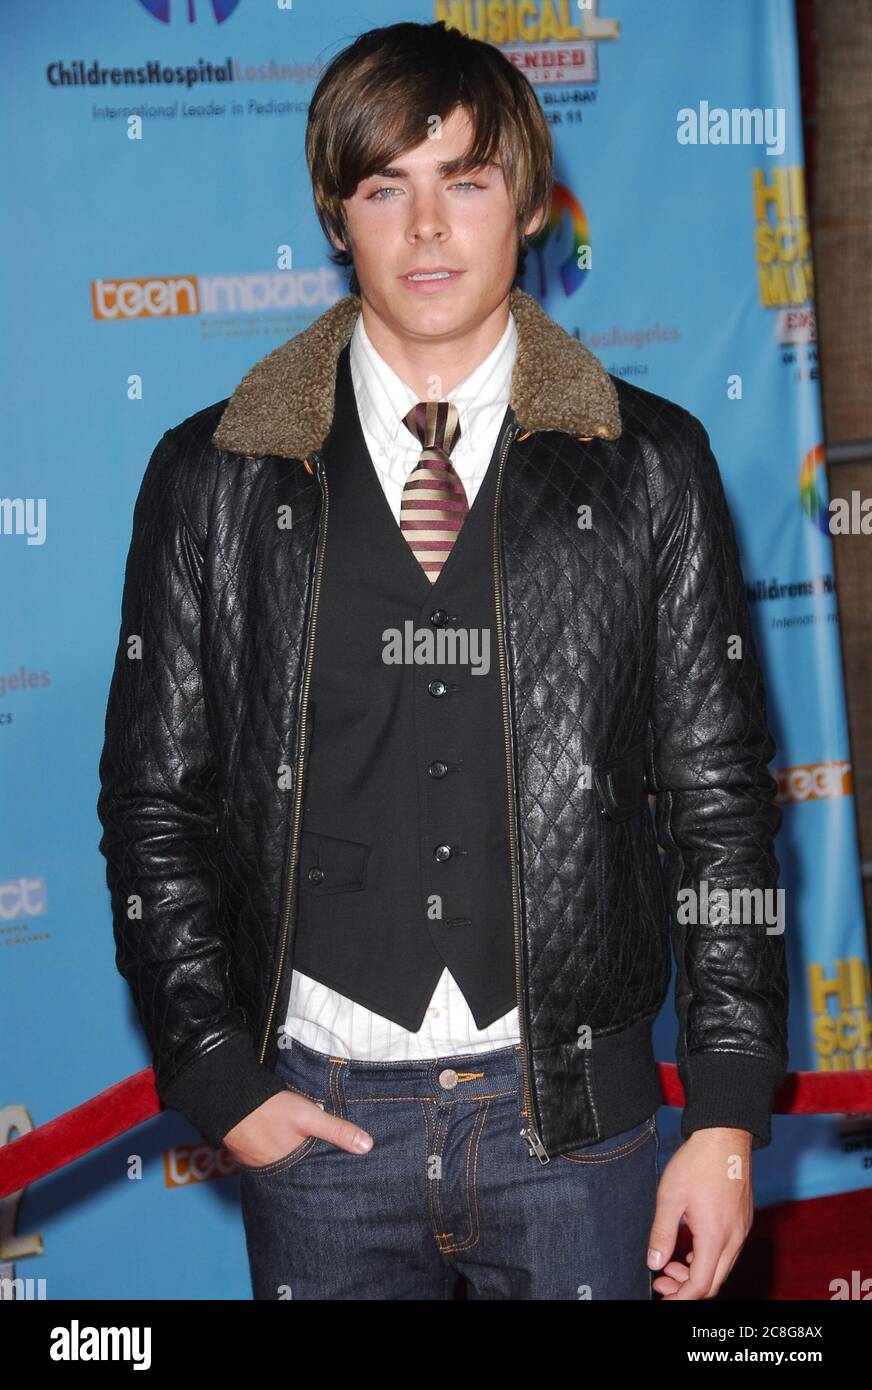 Zac Efron at the High School Musical 2: Extended Edition DVD Release Premiere held at the El Capitan Theatre in Hollywood, CA. The event took place on Monday, November 19, 2007. Photo by: SBM / PictureLux - File Reference # 34006-11929SBMPLX Stock Photo